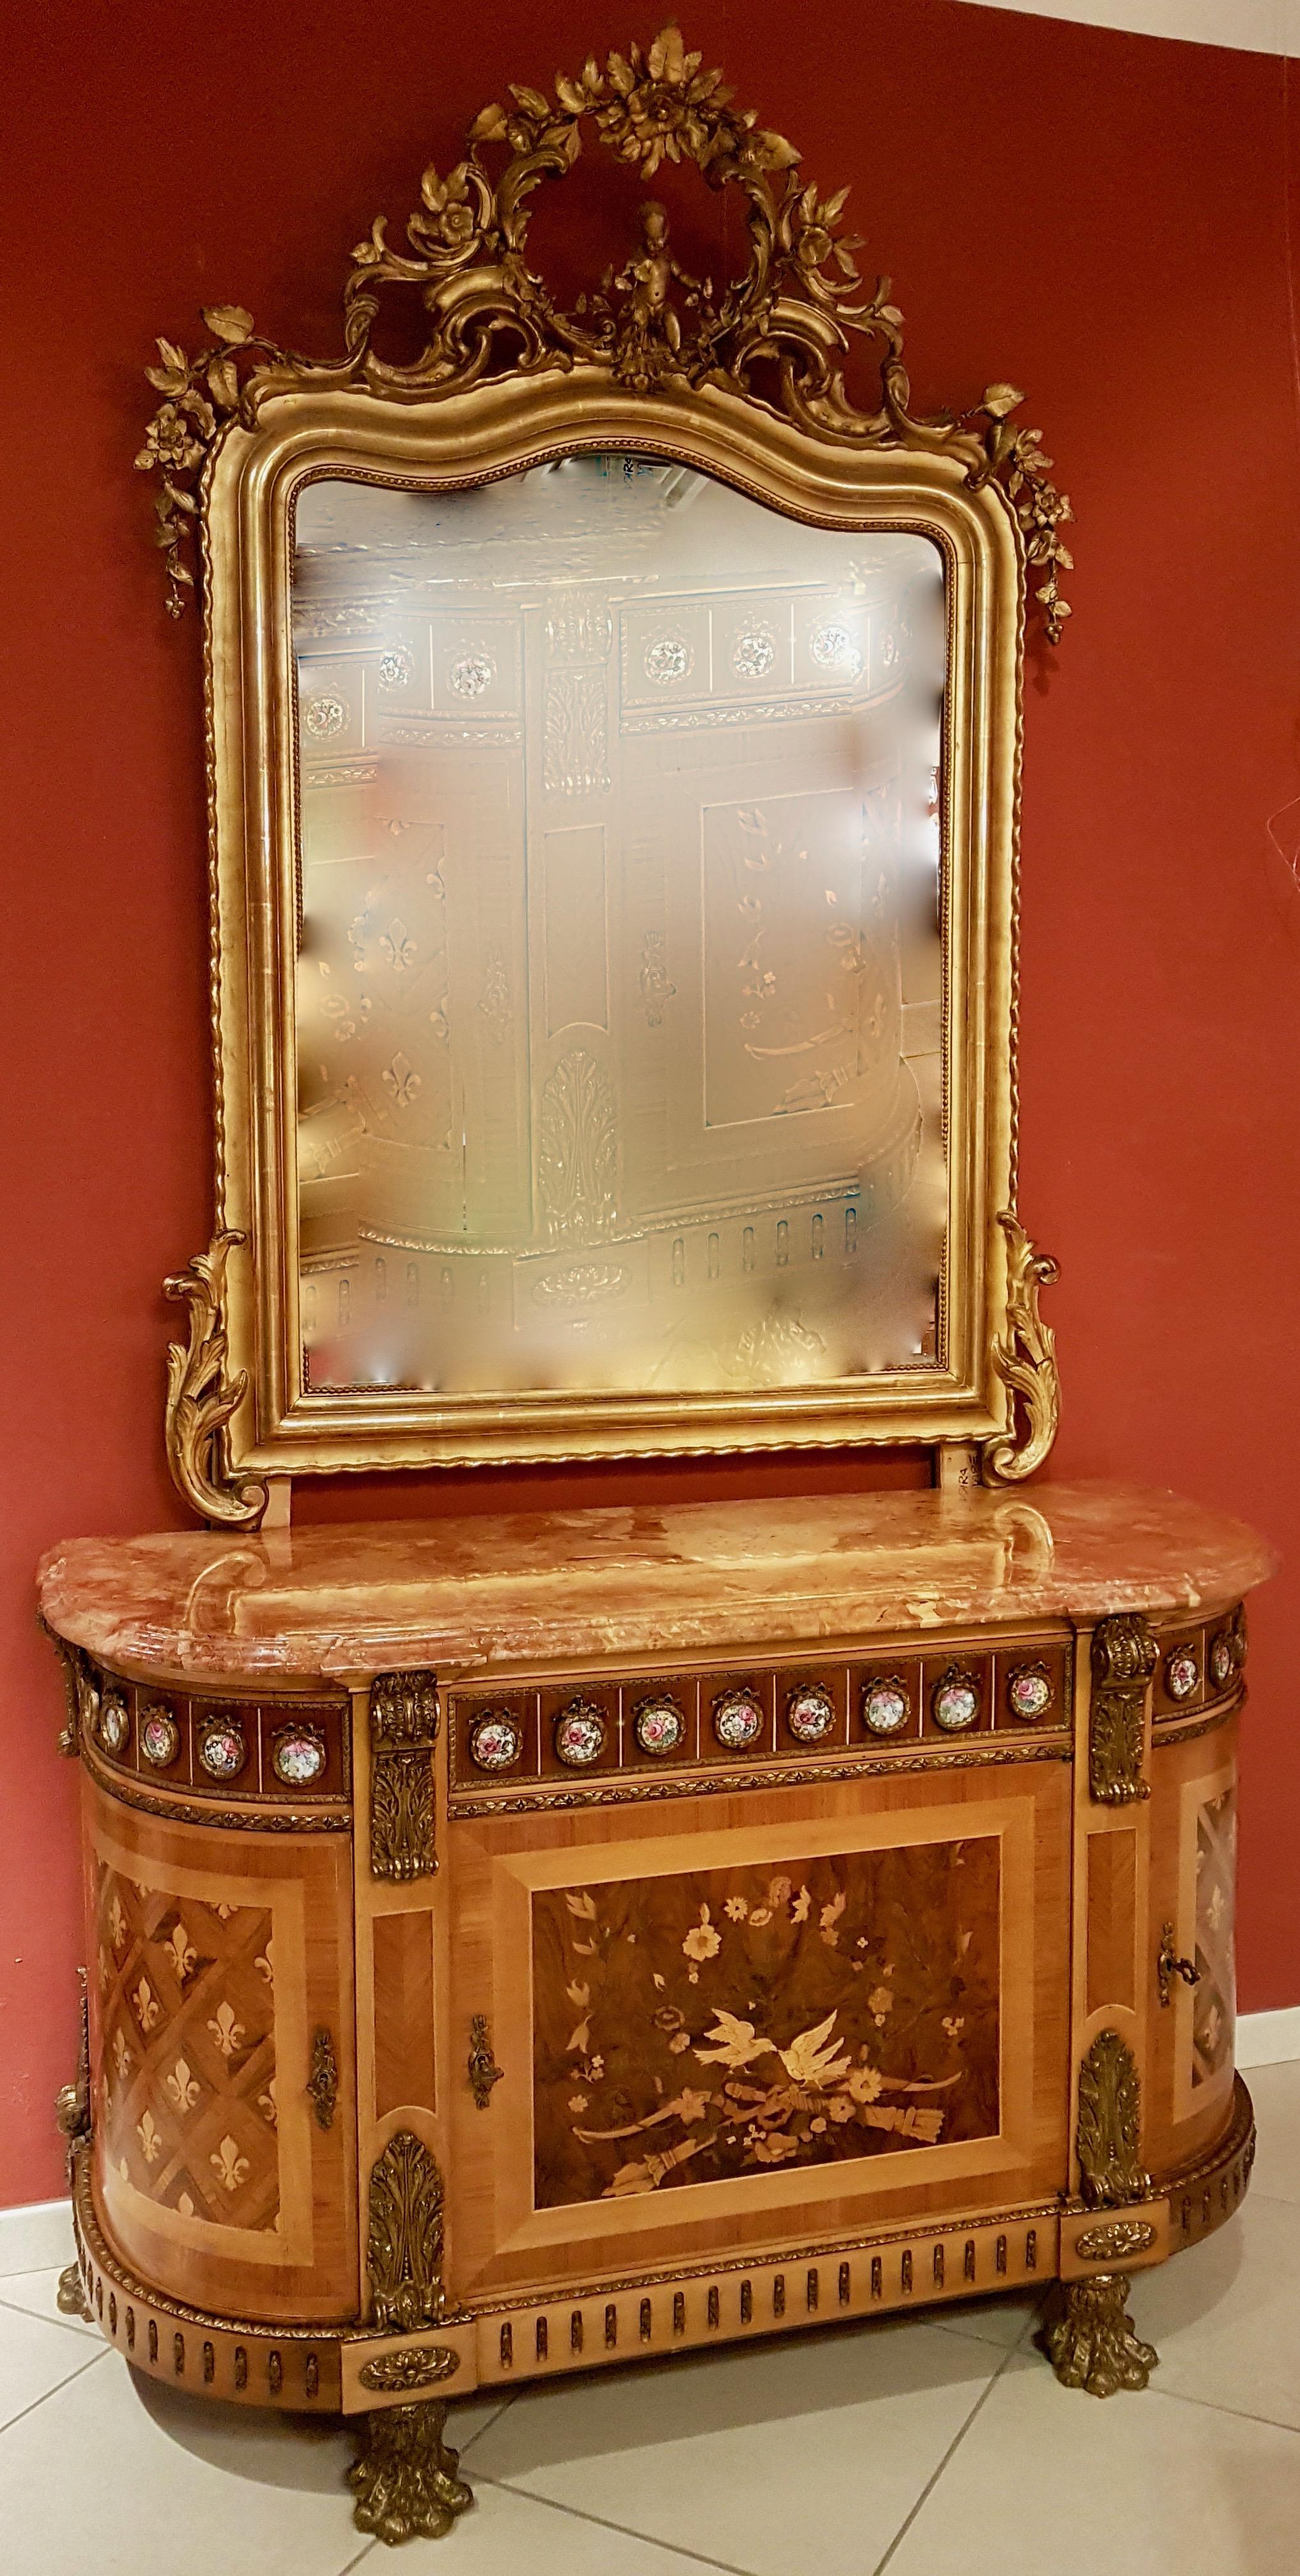 Reproduction of the original sideboard made in 1788 by Guillaume Beneman, originally located in the chamber of Louis XVI at the castle of Campiegne.
The sideboard was built in the 1940s and is composed of 3 doors including 2 curves and 1 straight,